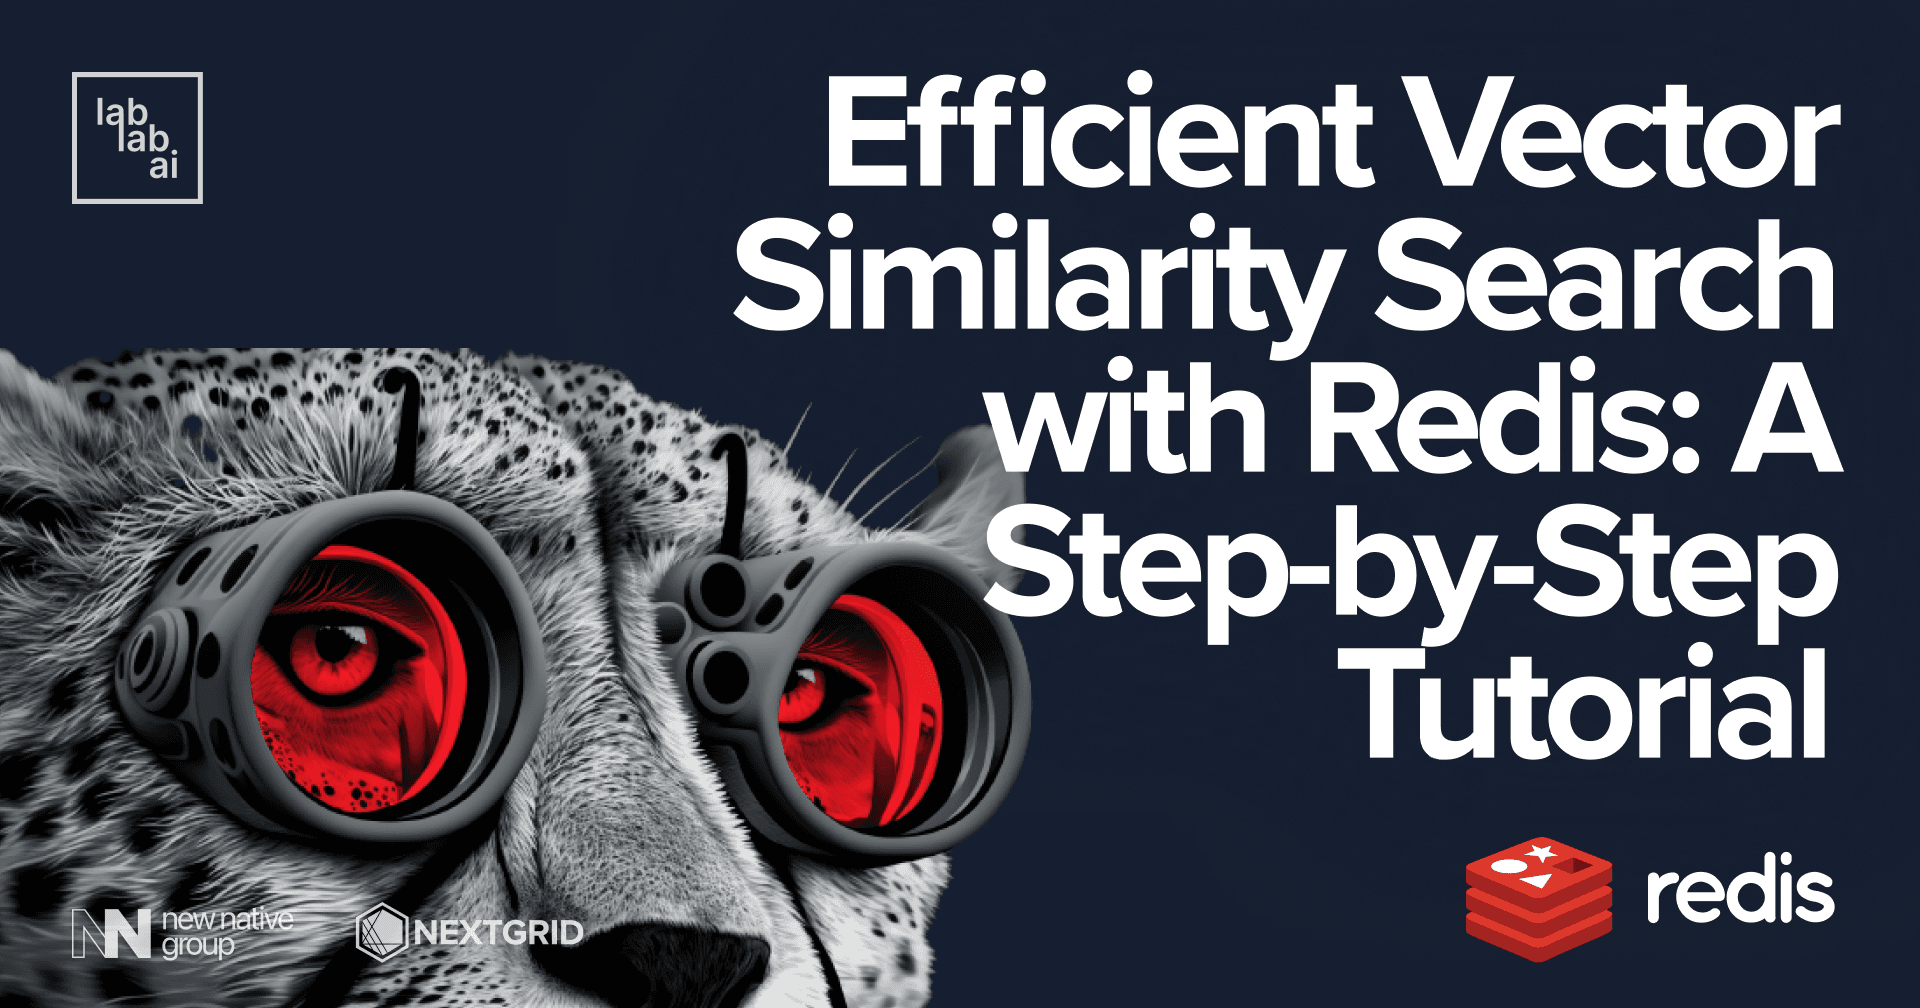 Efficient vector similarity search with Redis: a step-by-step tutorial